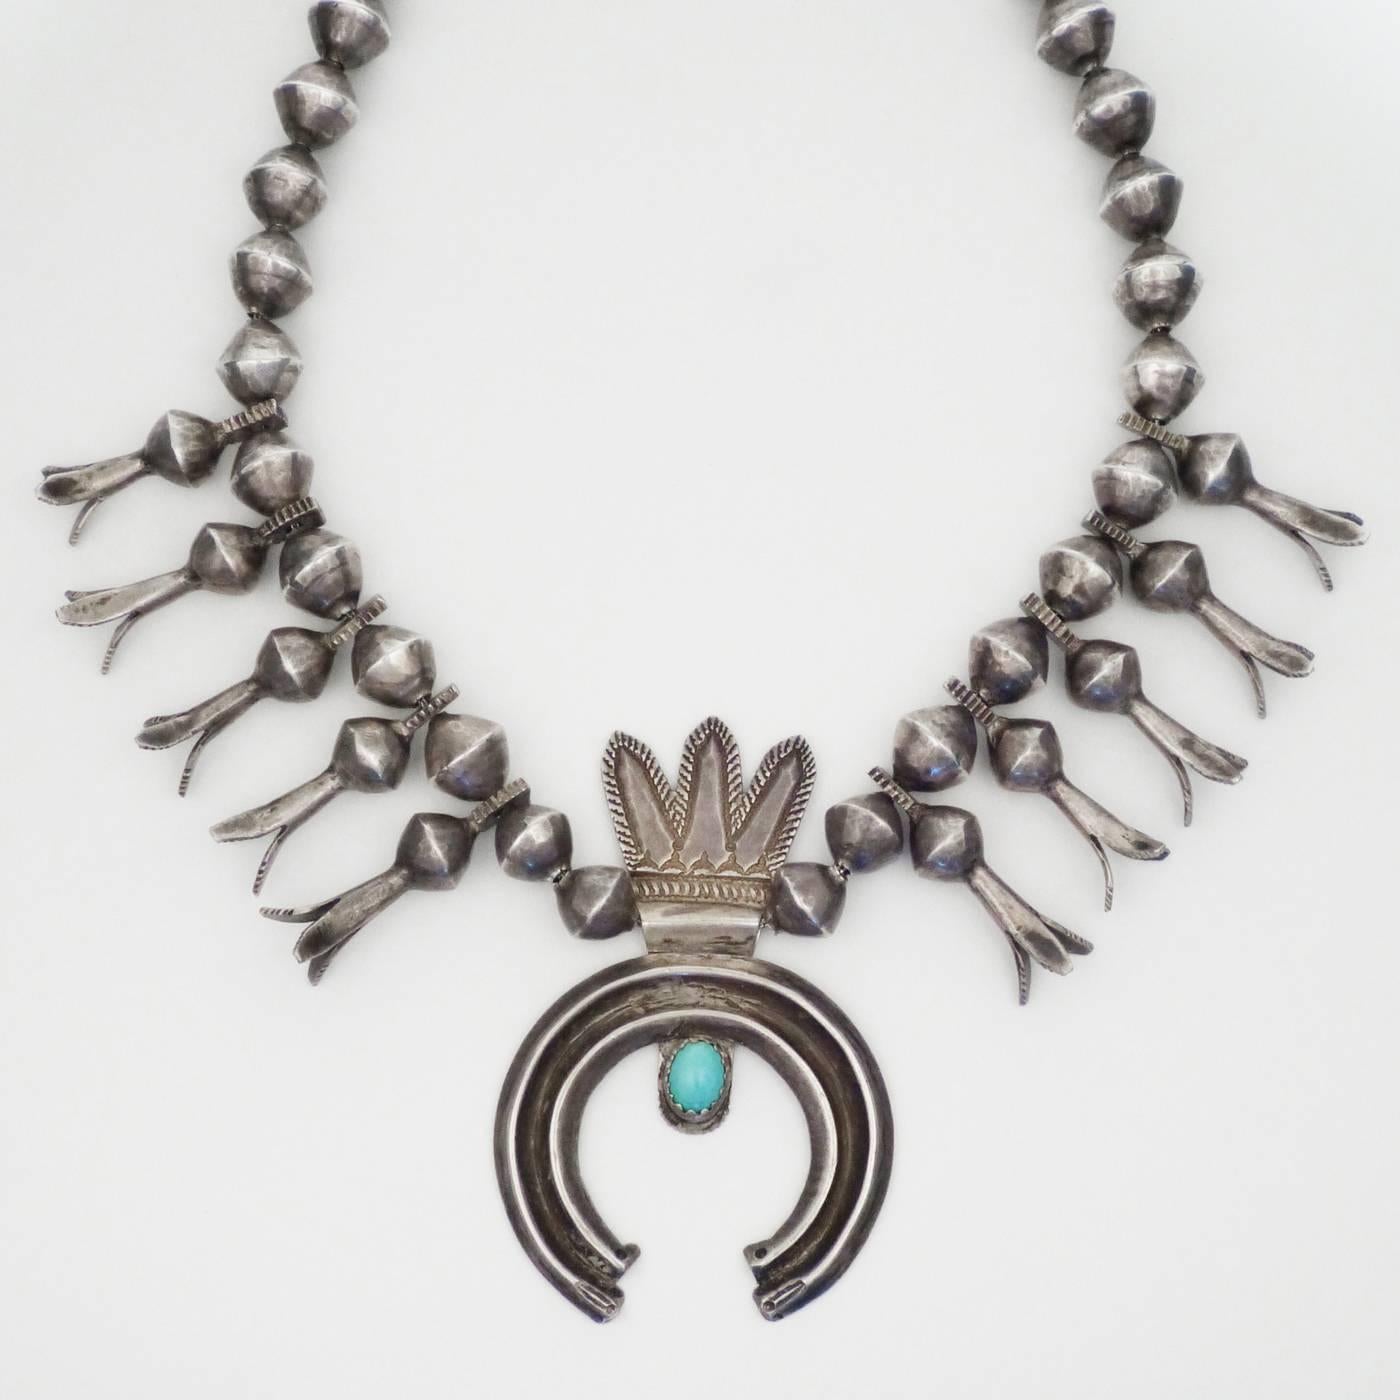 An iconic example of early Navajo silverwork, this naja features stamping and cold chisel decorations on hand-hammered ingot silver with handmade beads and naja. The naja with the headdress/feathered element is incredible rare. 25 1/2